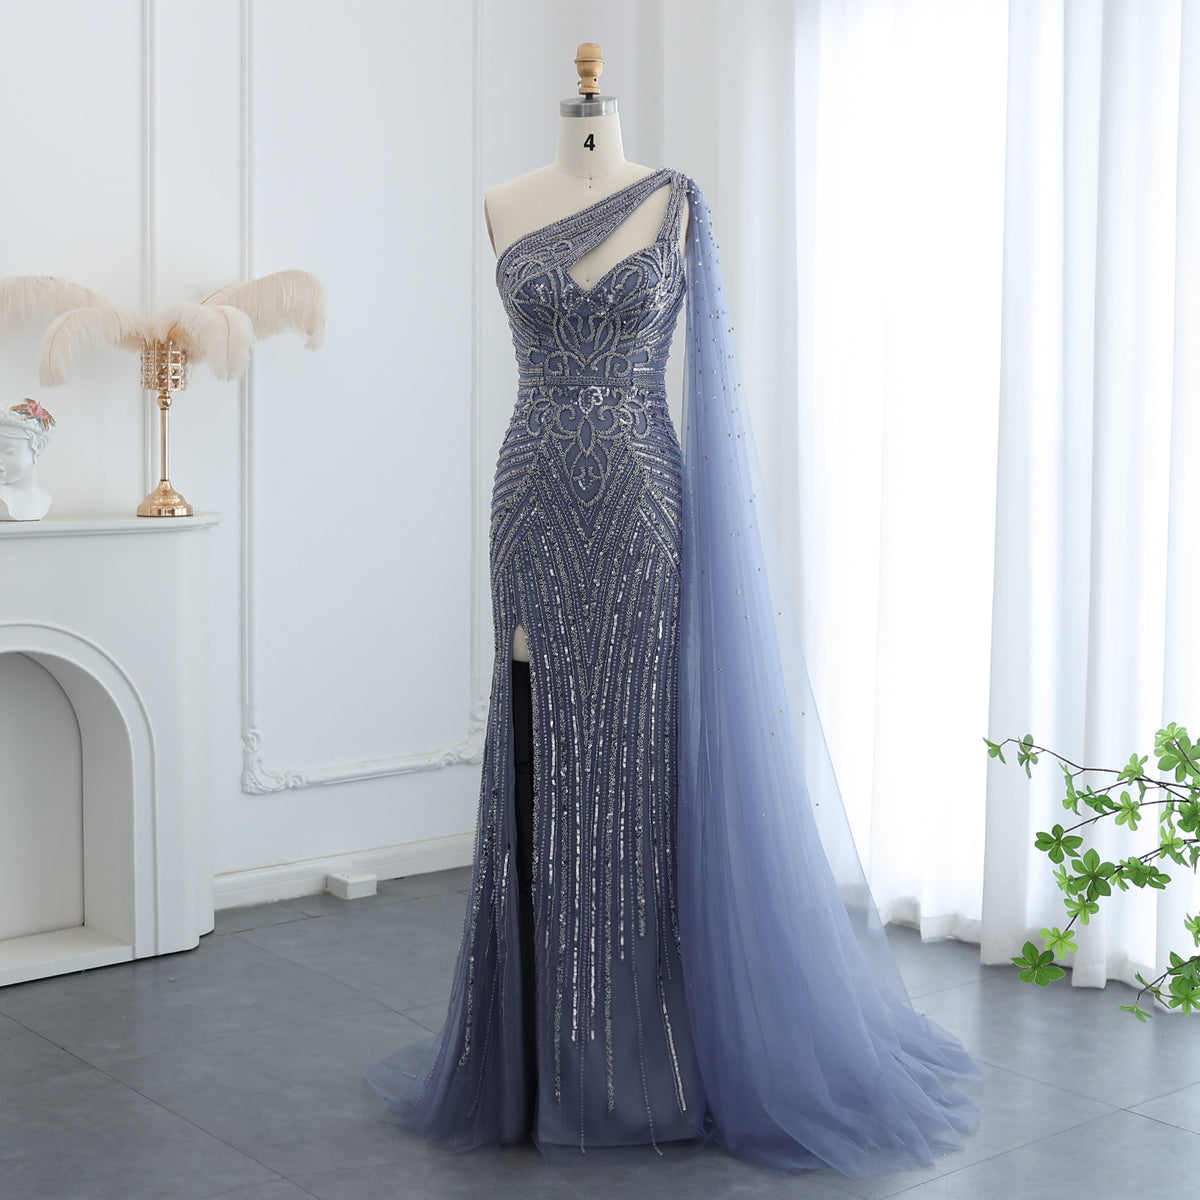 Sharon Said Luxury Beaded Blue Mermaid Nude Evening Dress with Cape Sleeve One Shoulder Side Slit Women Wedding Party Gowns SS175